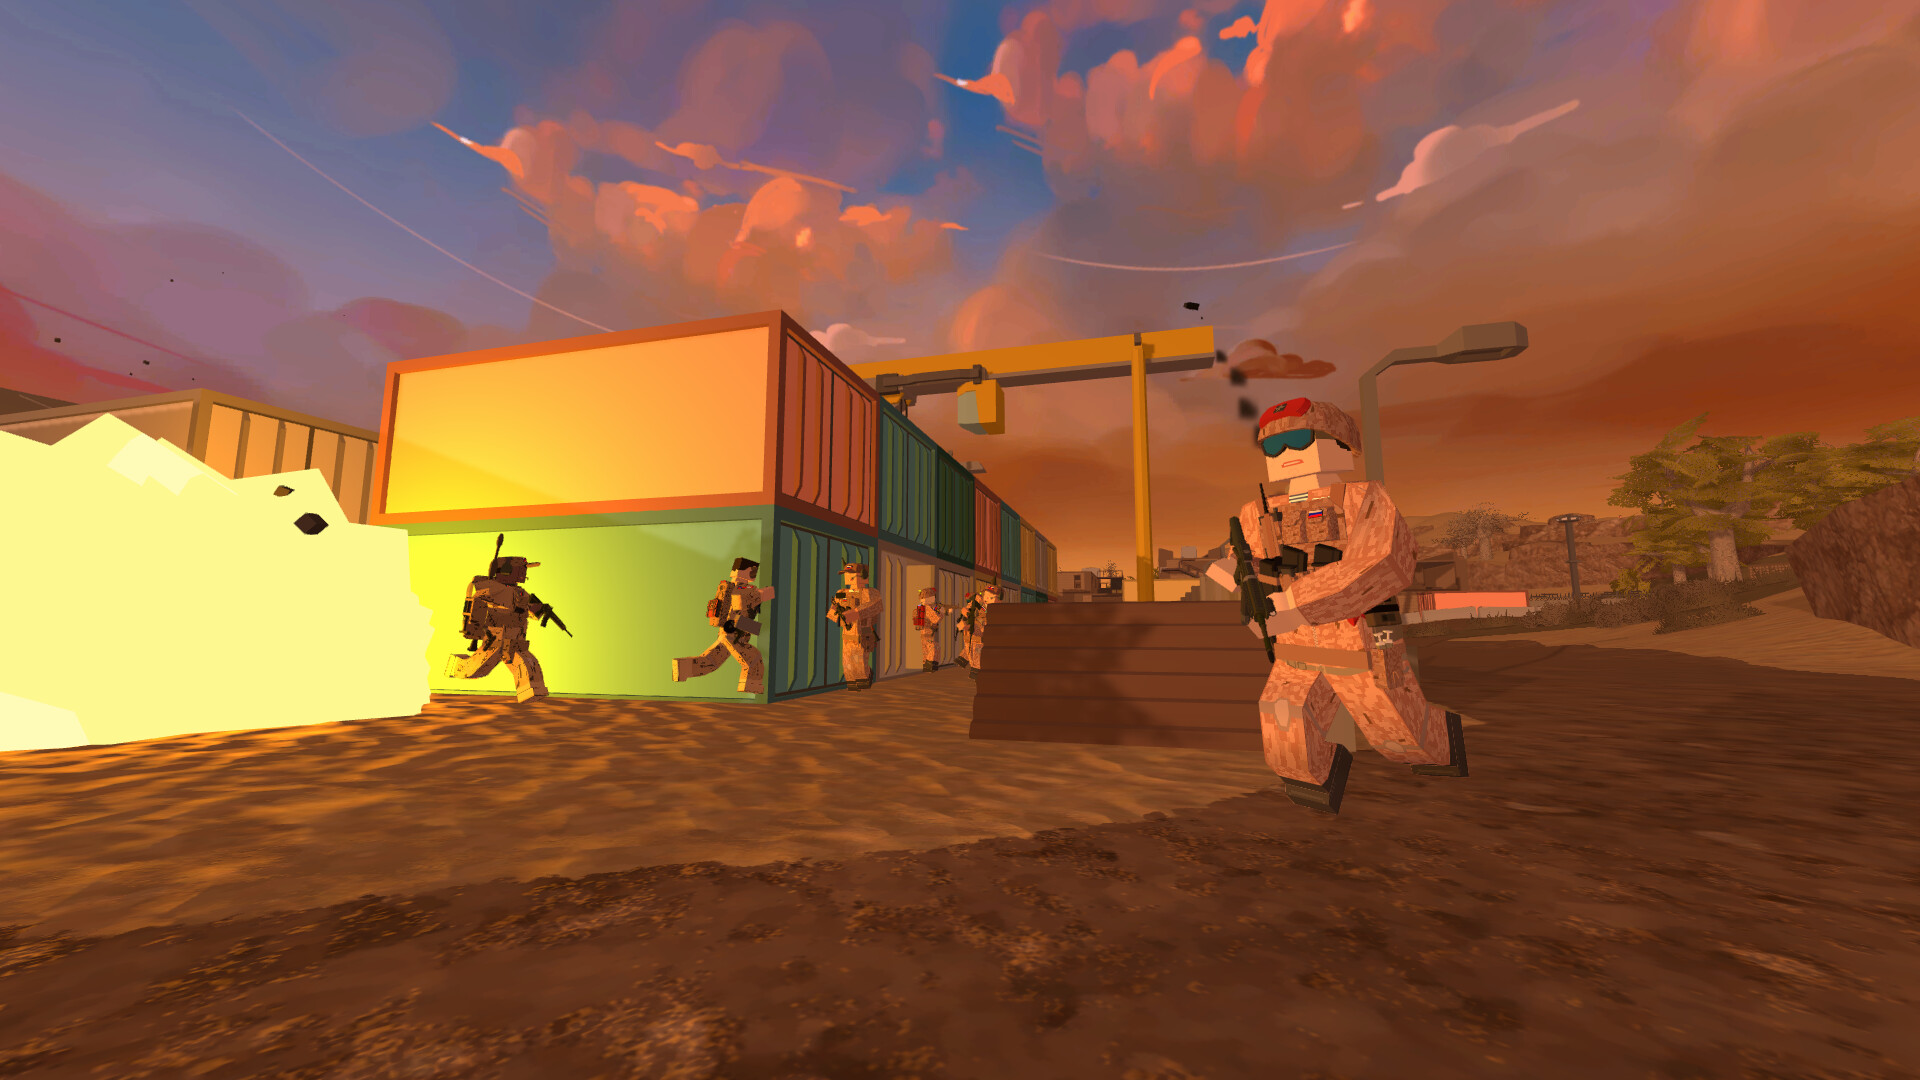 A blocky, low-poly infantryman carrying a rifle runs in the foreground. In the background, several more similarly shaped soldiers run from an explosion